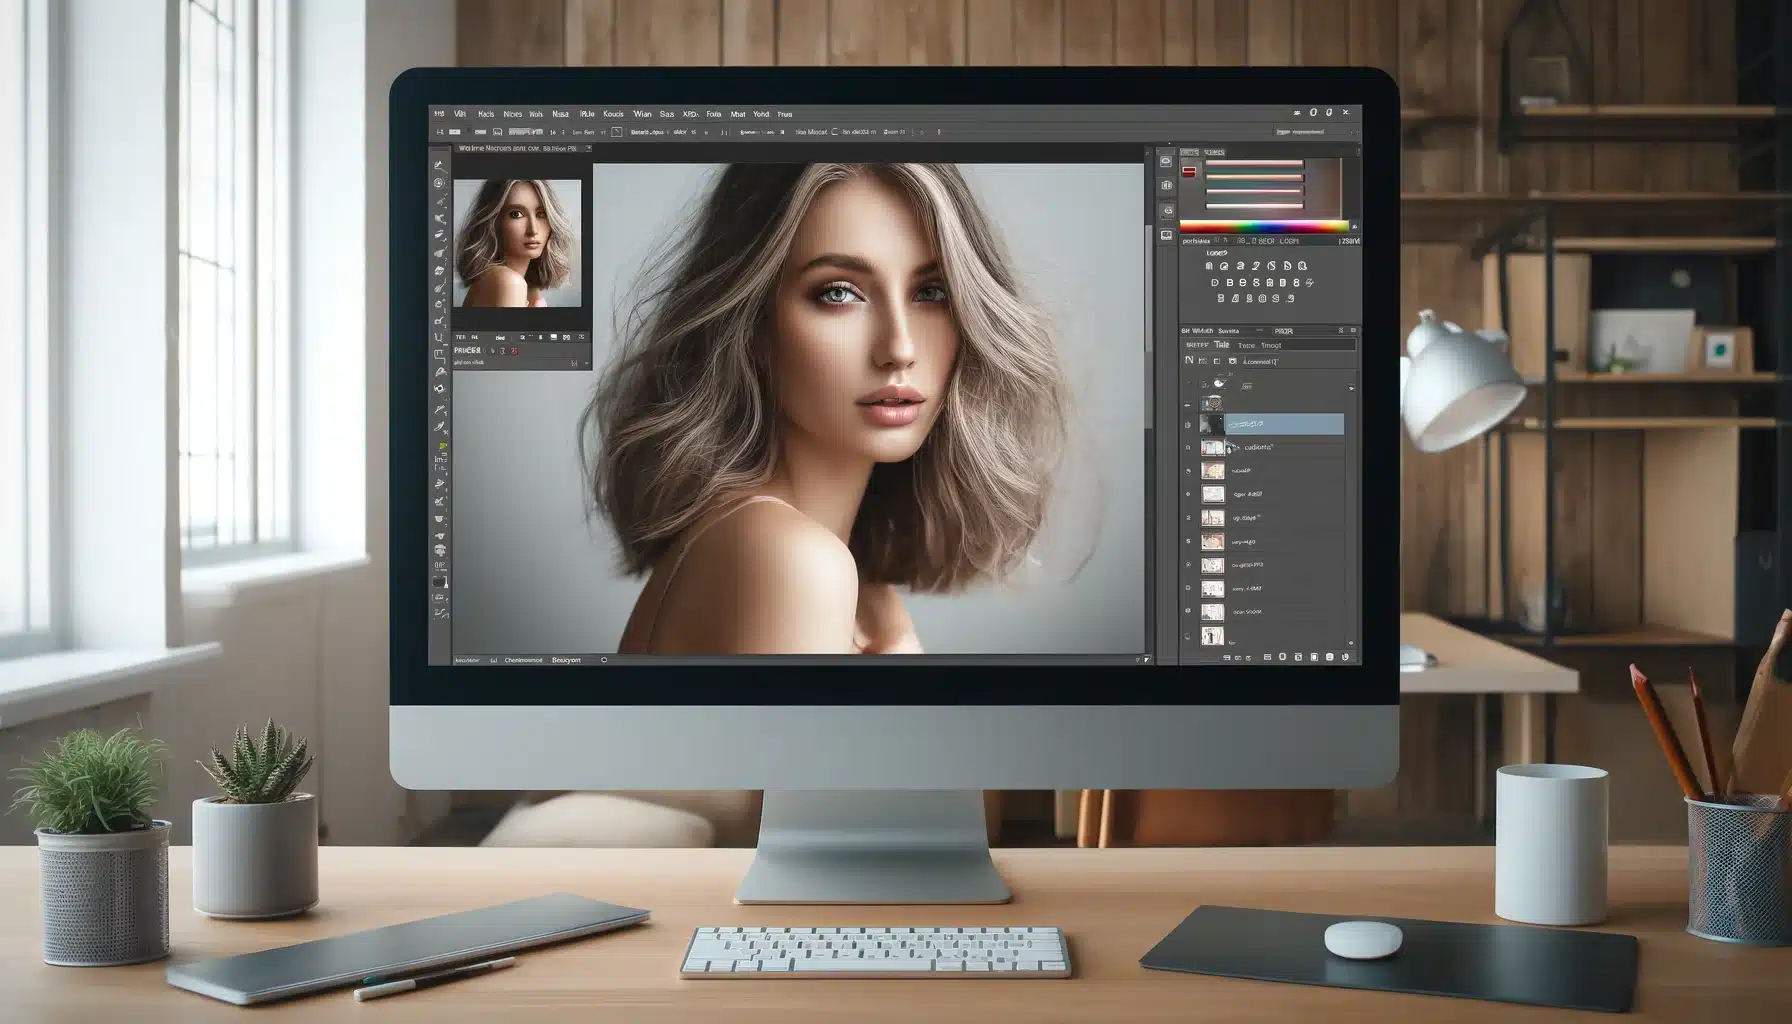 Photoshop interface showing an image of a woman with a blurred background